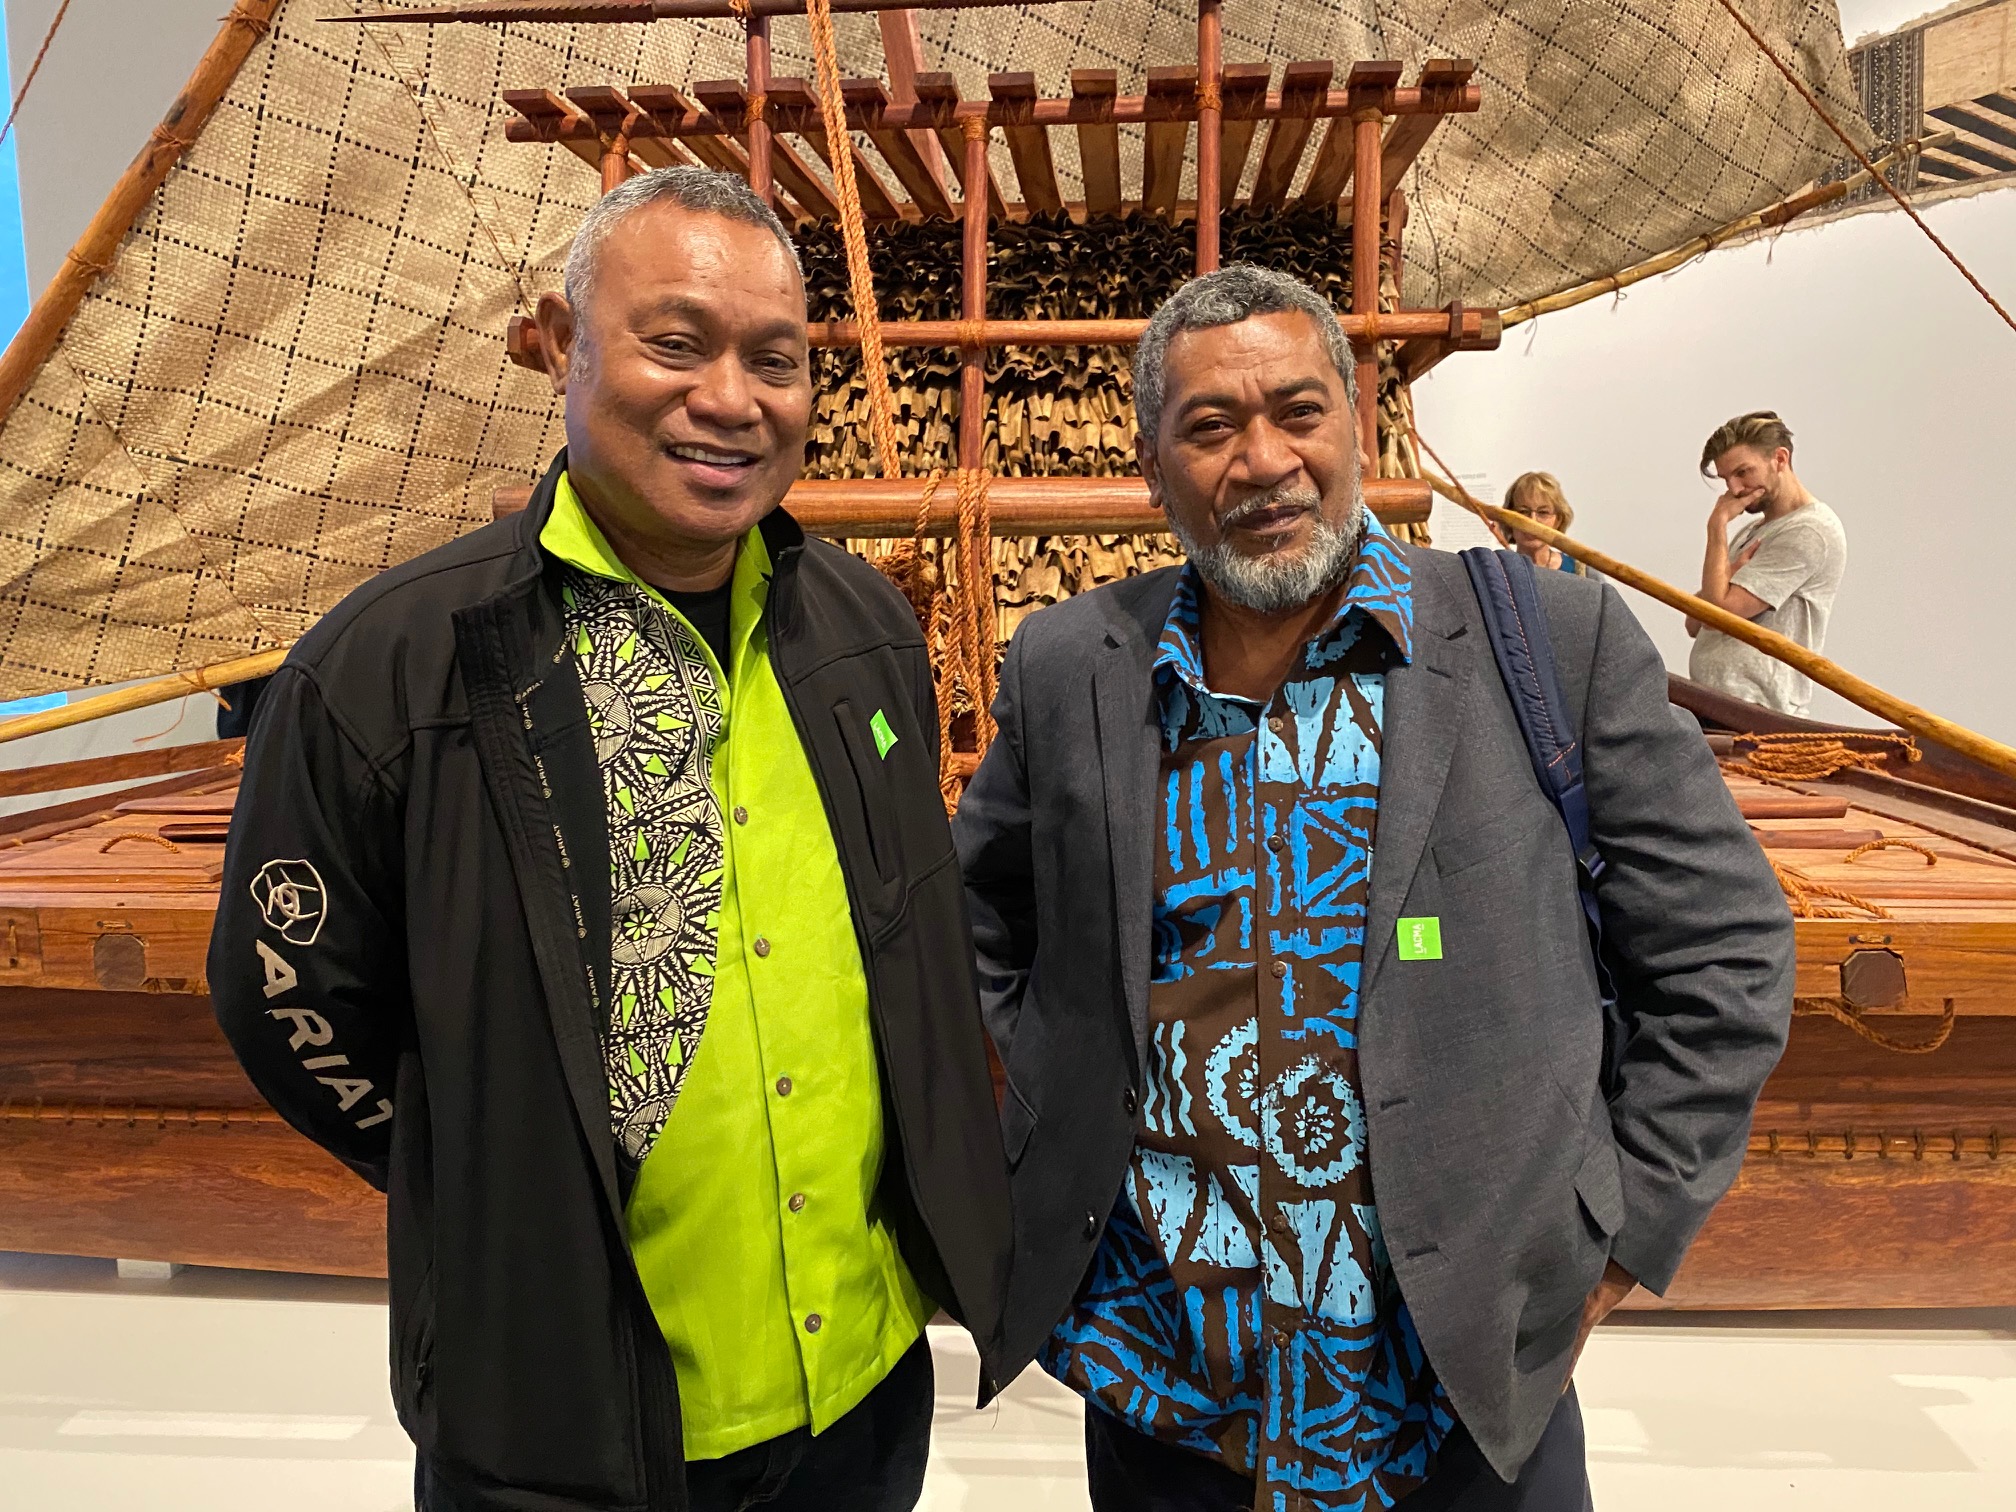 Joji Marau Misaele (left) and Setareki Domonisere (right) in front of the drua they constructed in LACMA’s Fiji: Art & Life in the Pacific exhibition.